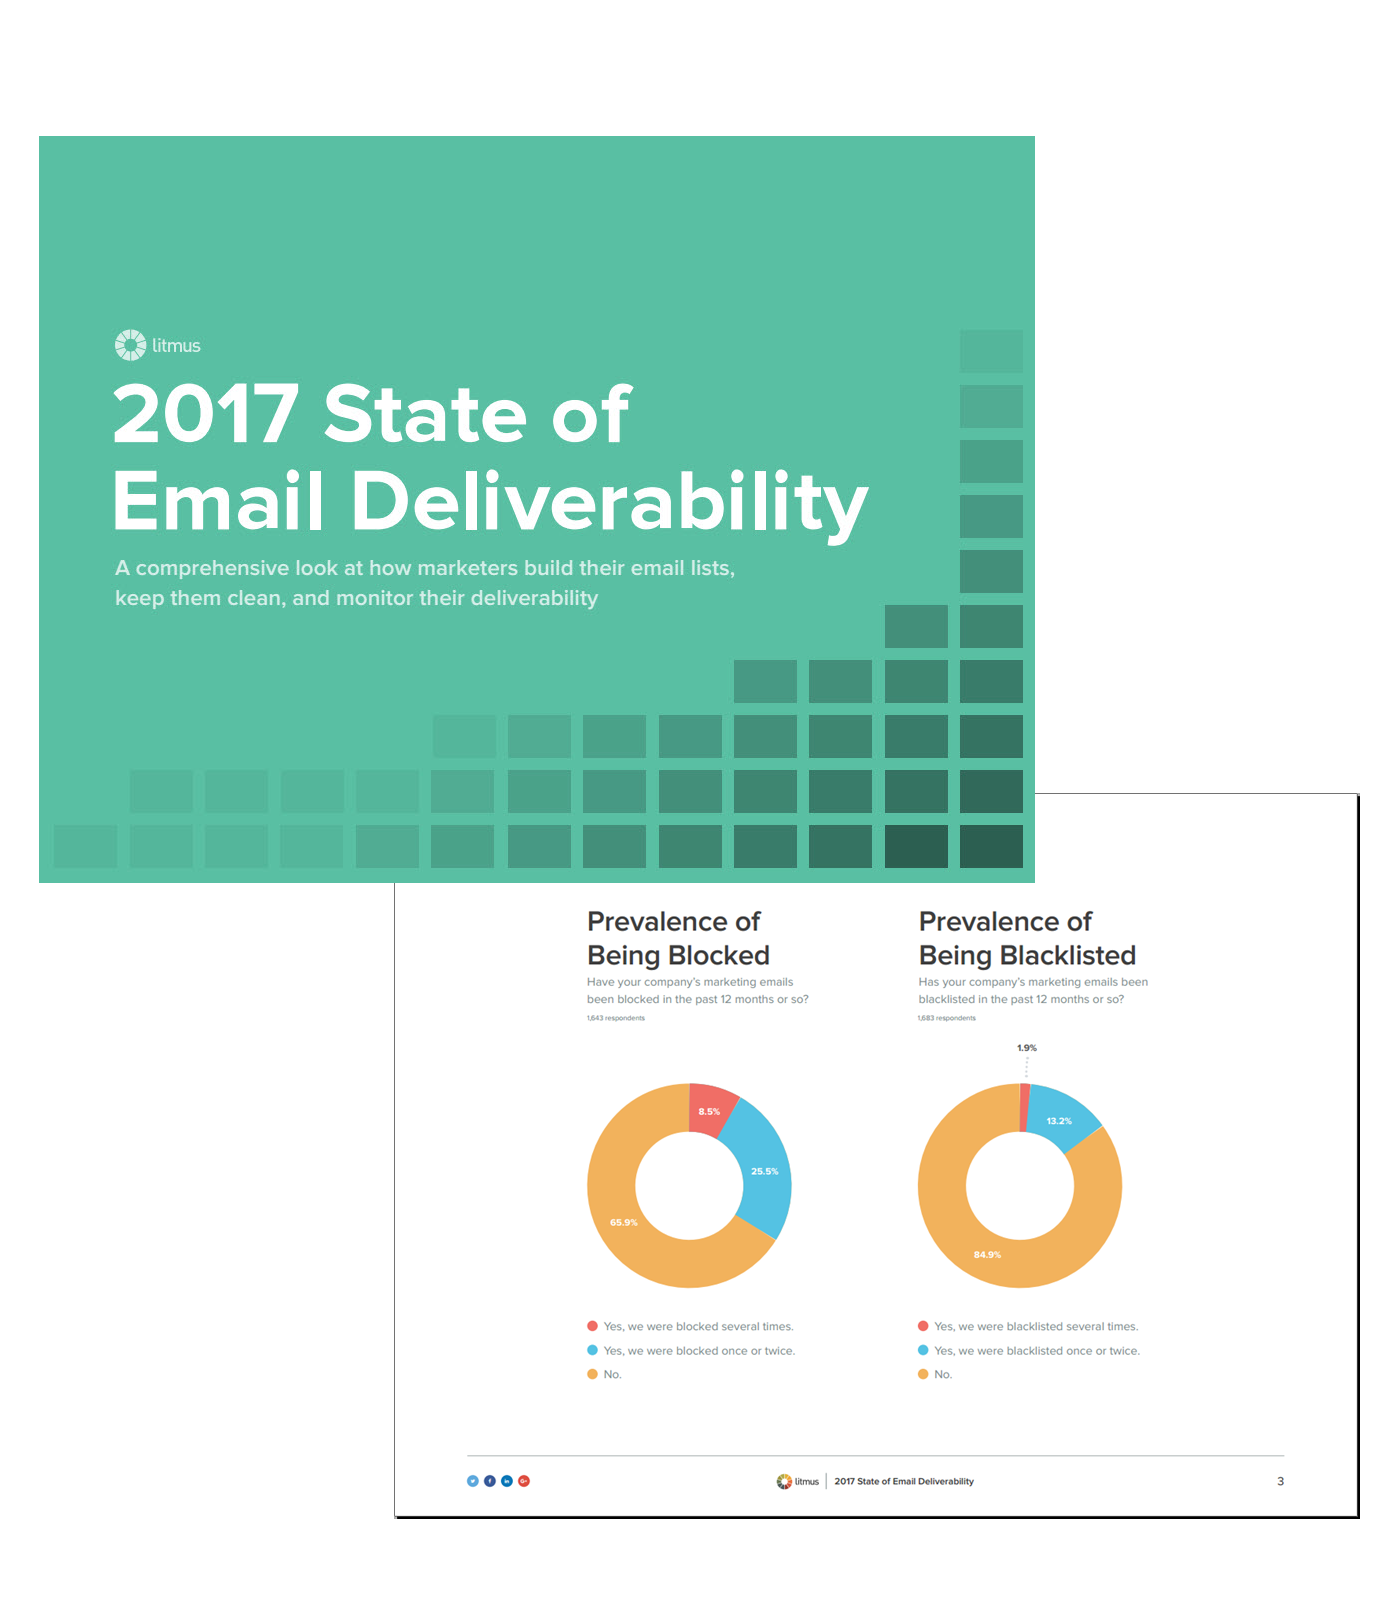 2017 State of Email Deliverability